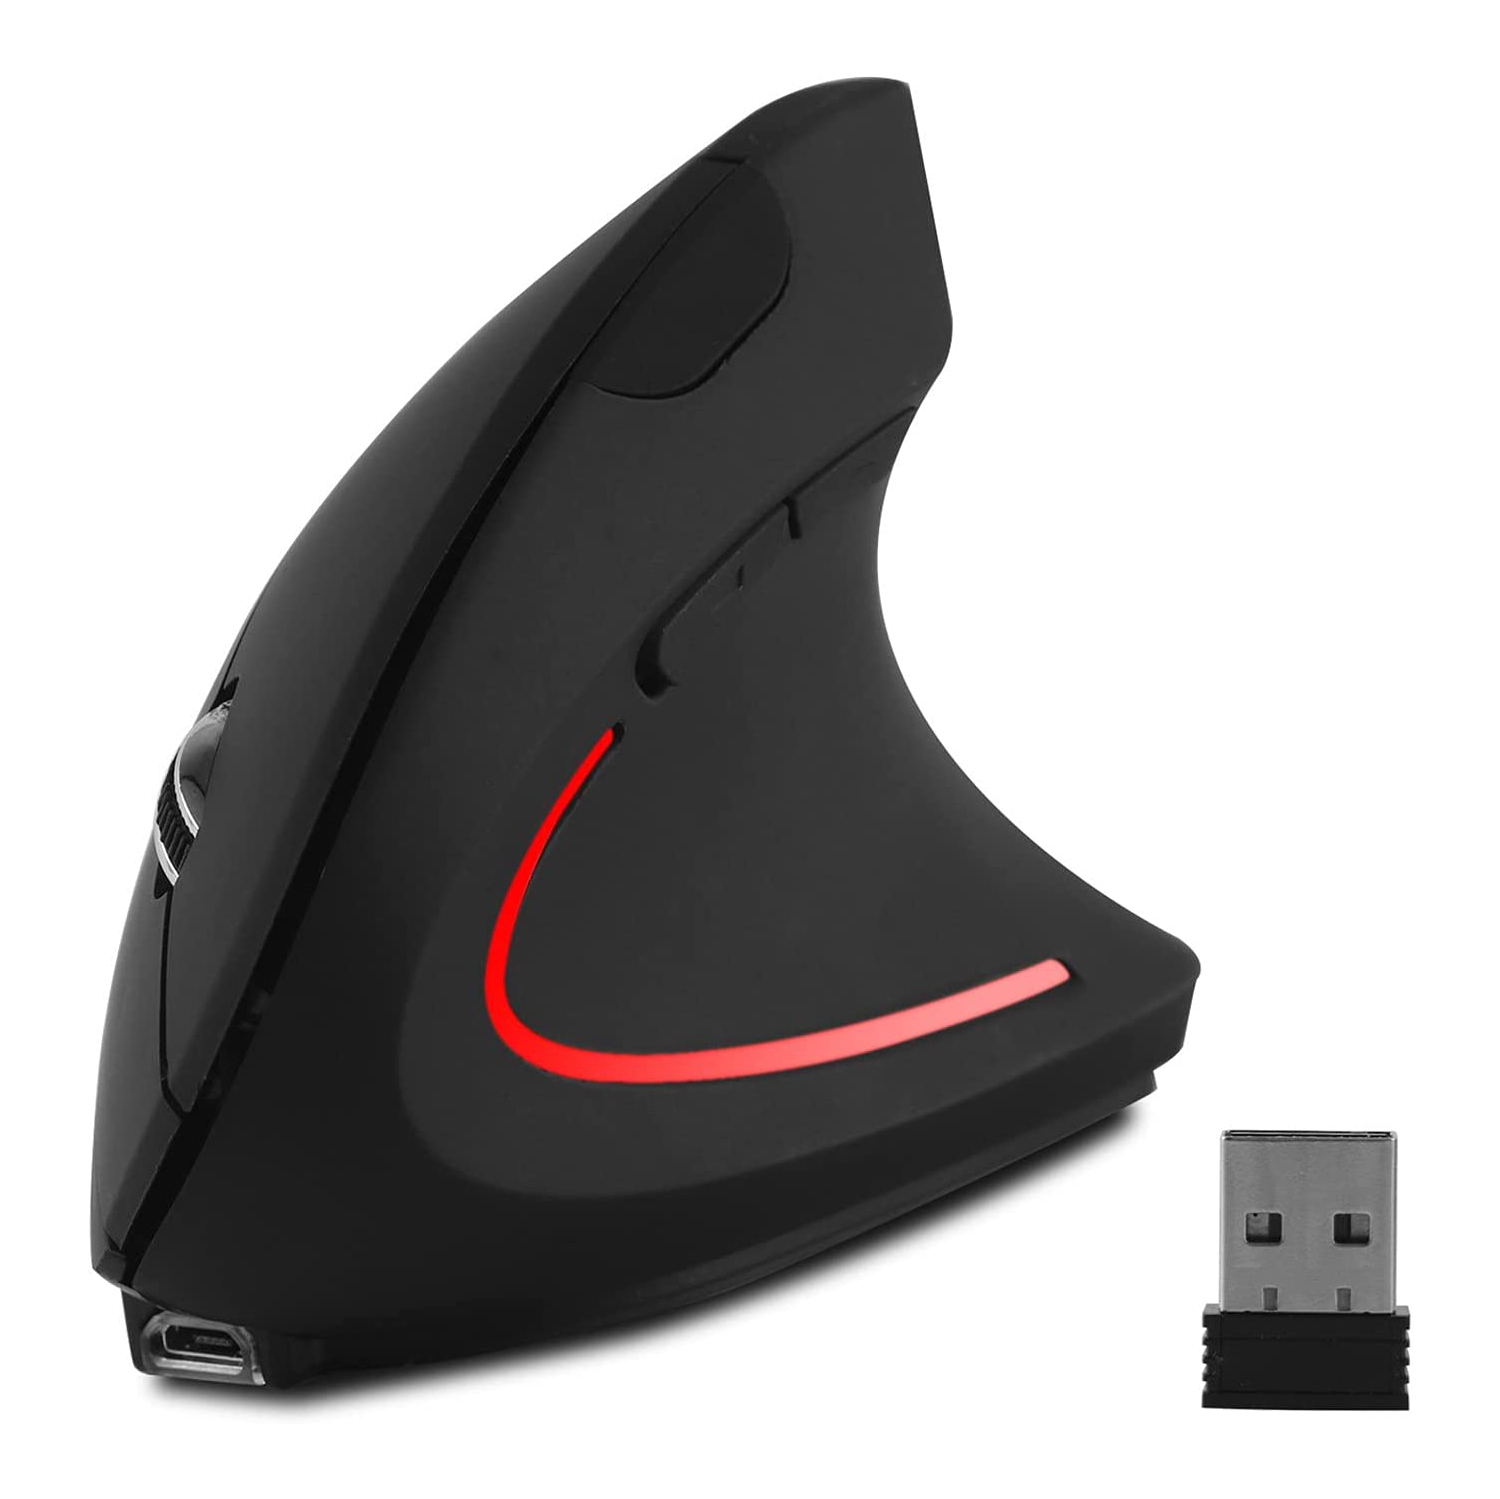 Wireless Vertical Mouse,Rechargeable 2.4G Ergonomic Wrist Relax Mice with 3 Adjustable DPI Levels and 6 Buttons for Laptop PC Notebook Chromebook Macbook